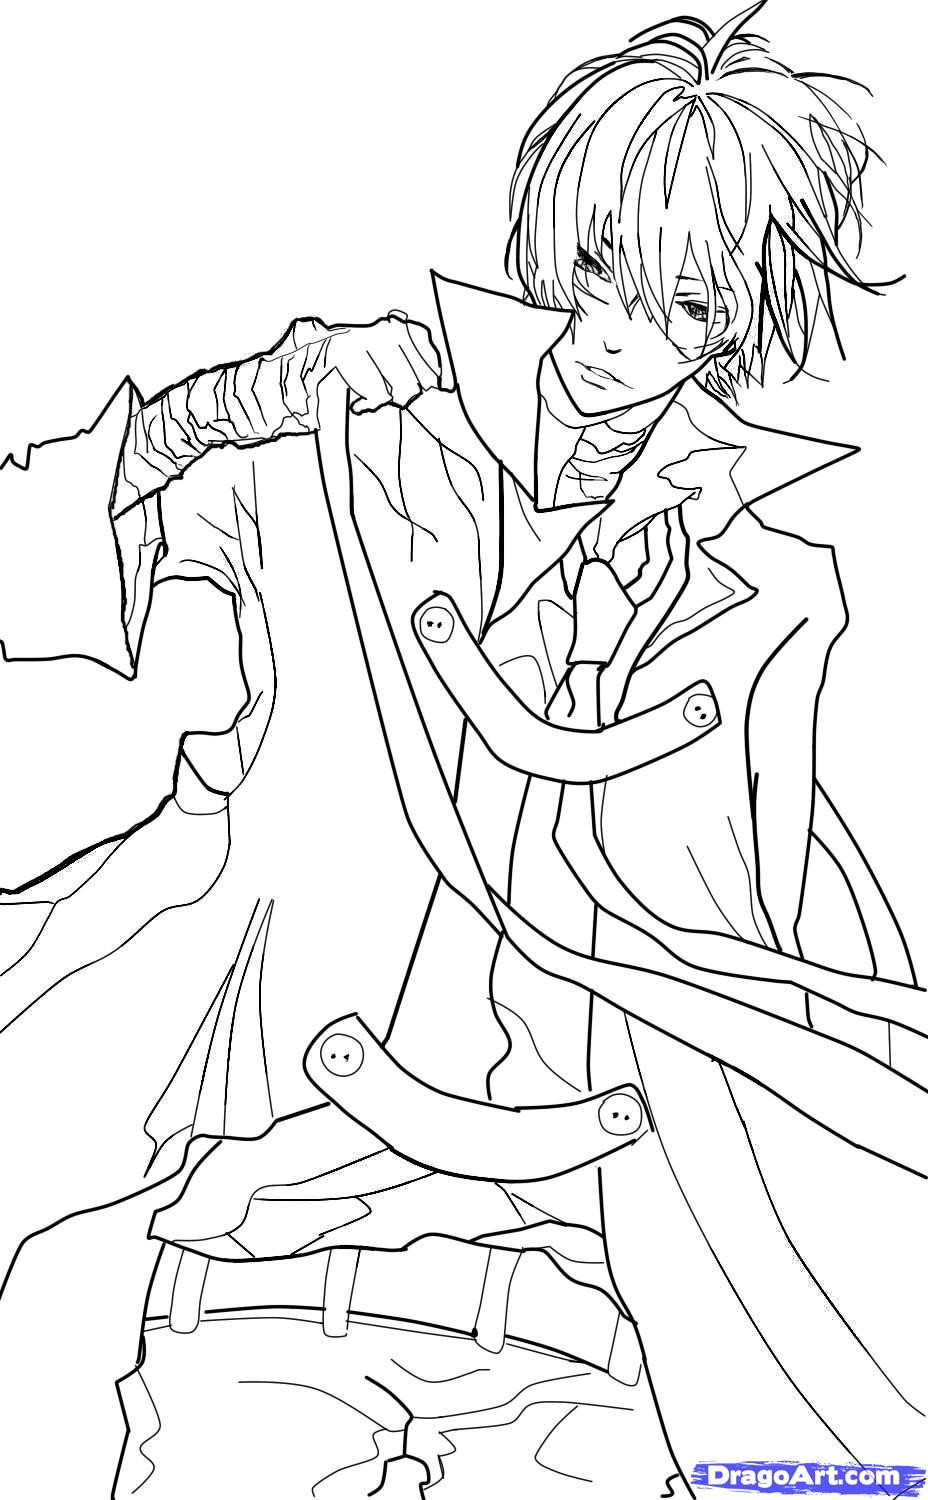 Anime Girl And Boy Coloring Pages
 How to Sketch an Anime Boy Step by Step Anime People